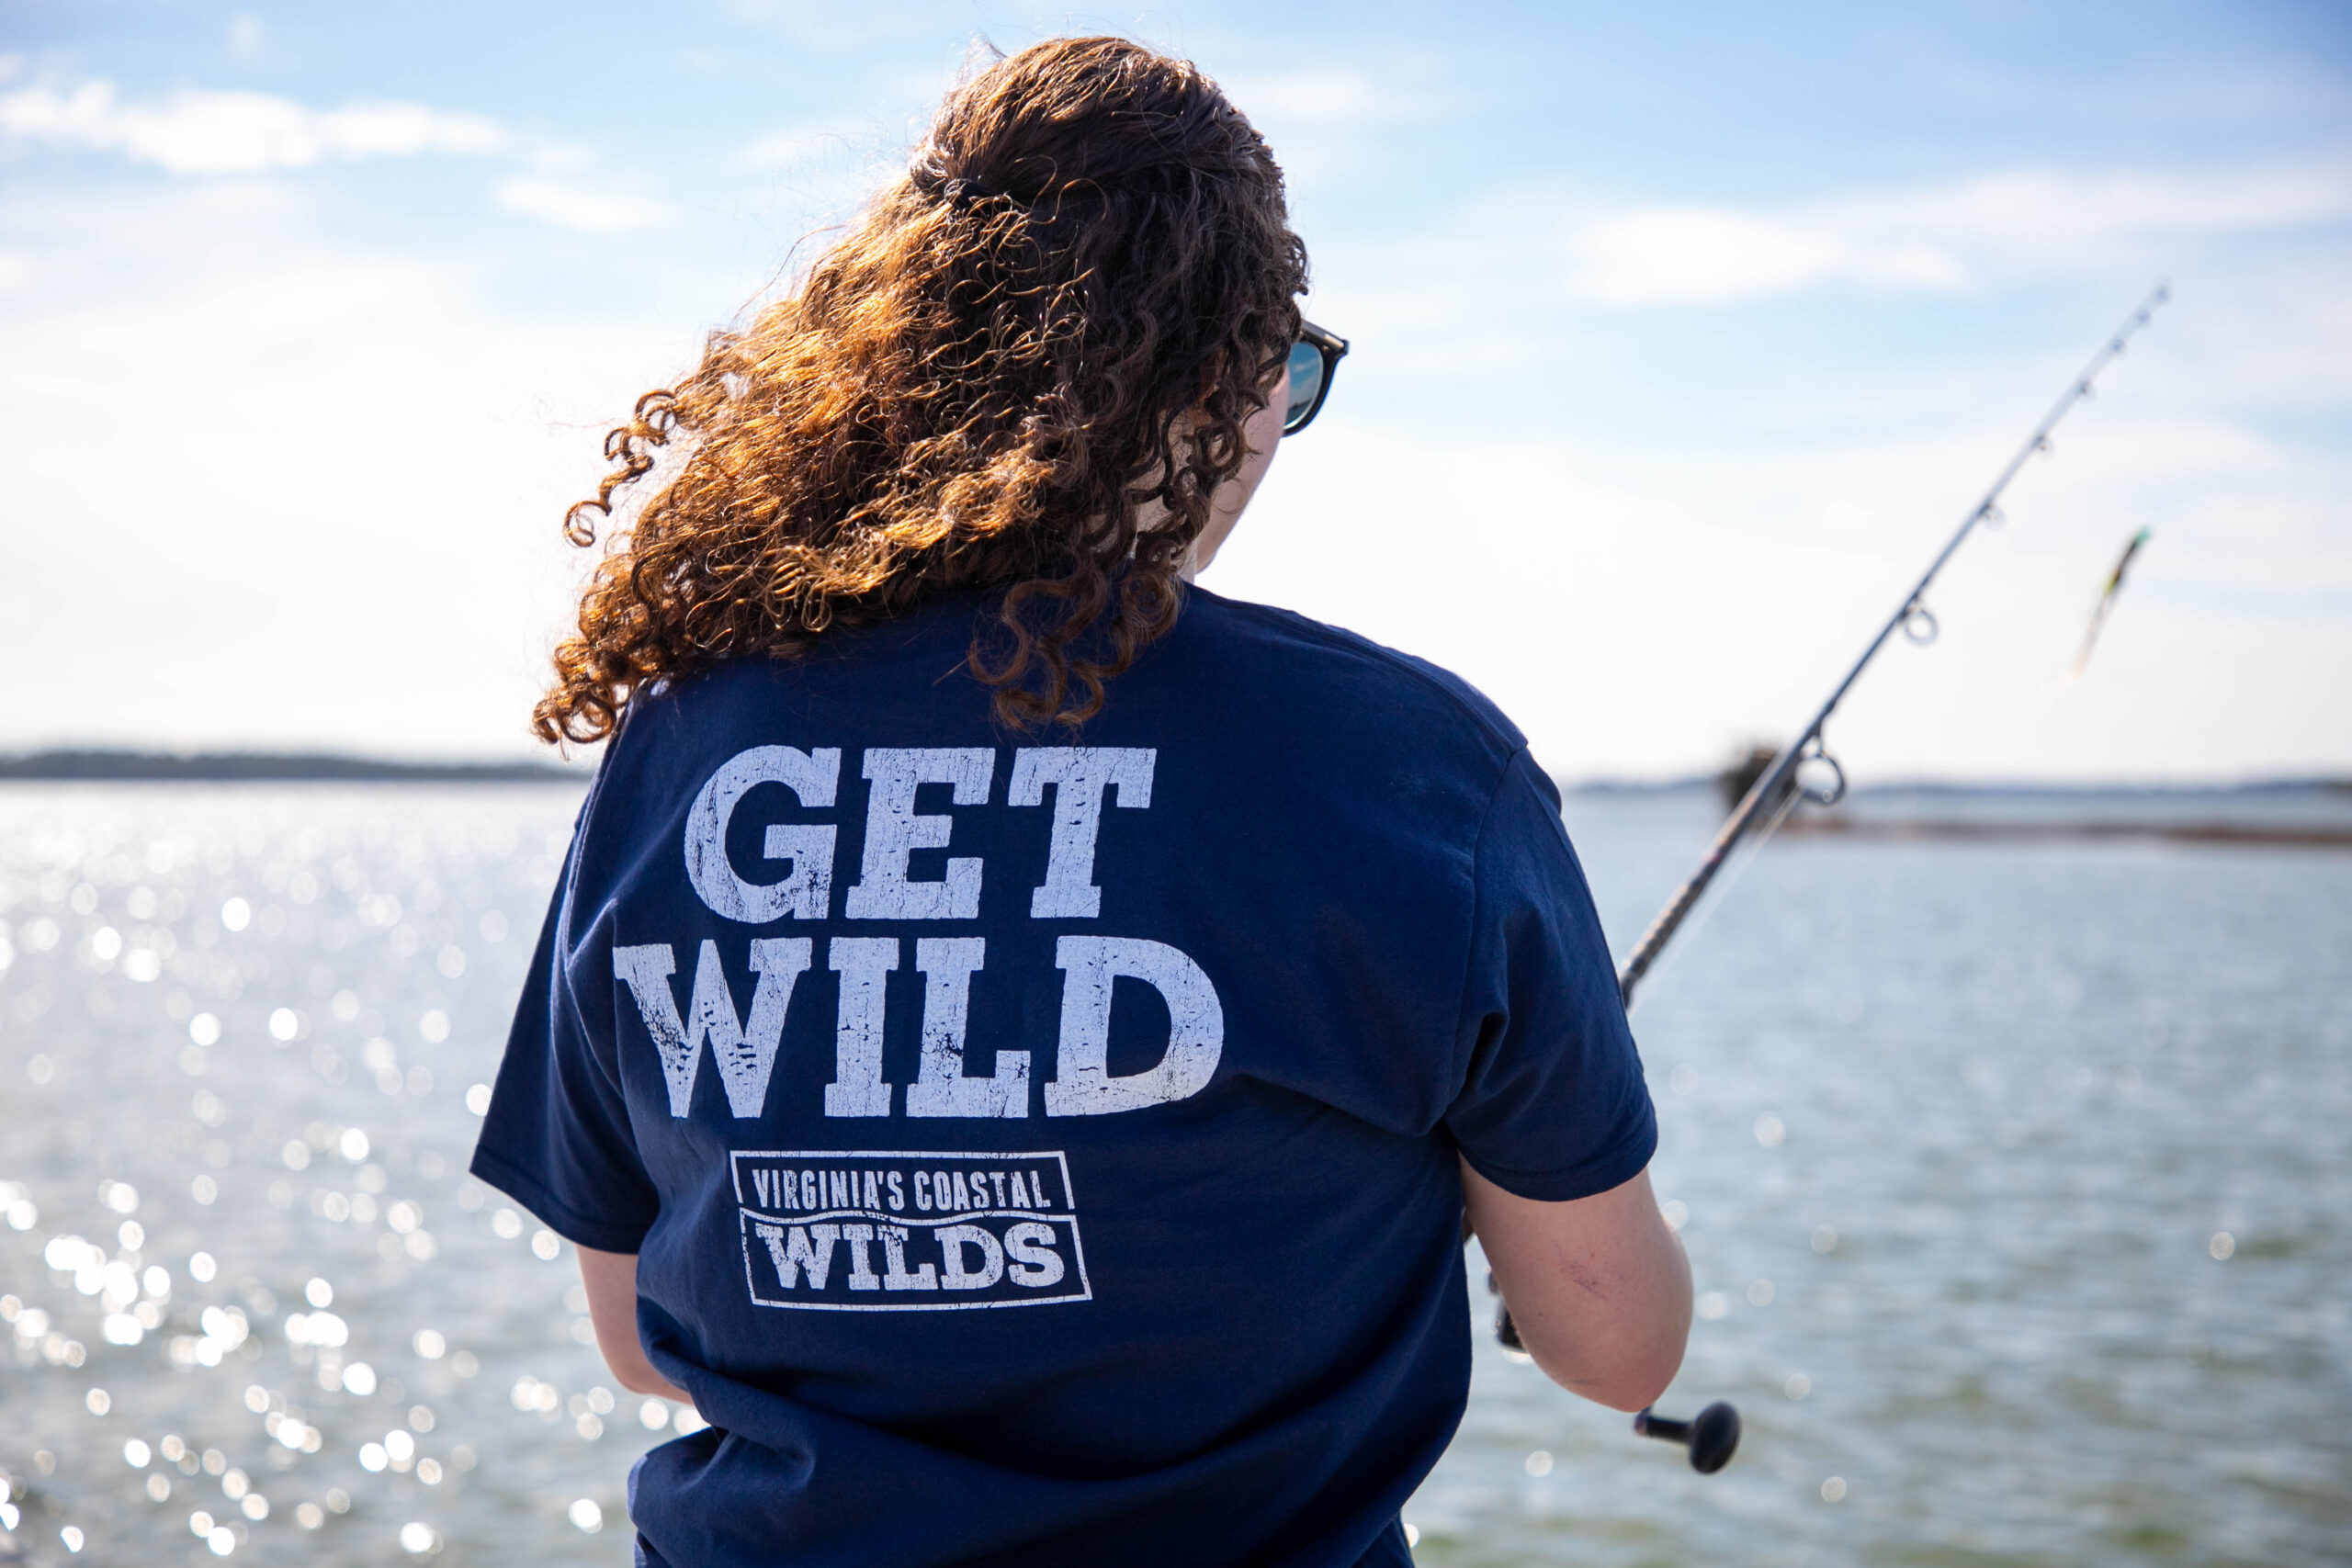 Help Virginia's Coastal Wilds Raise the Remaining Funds to